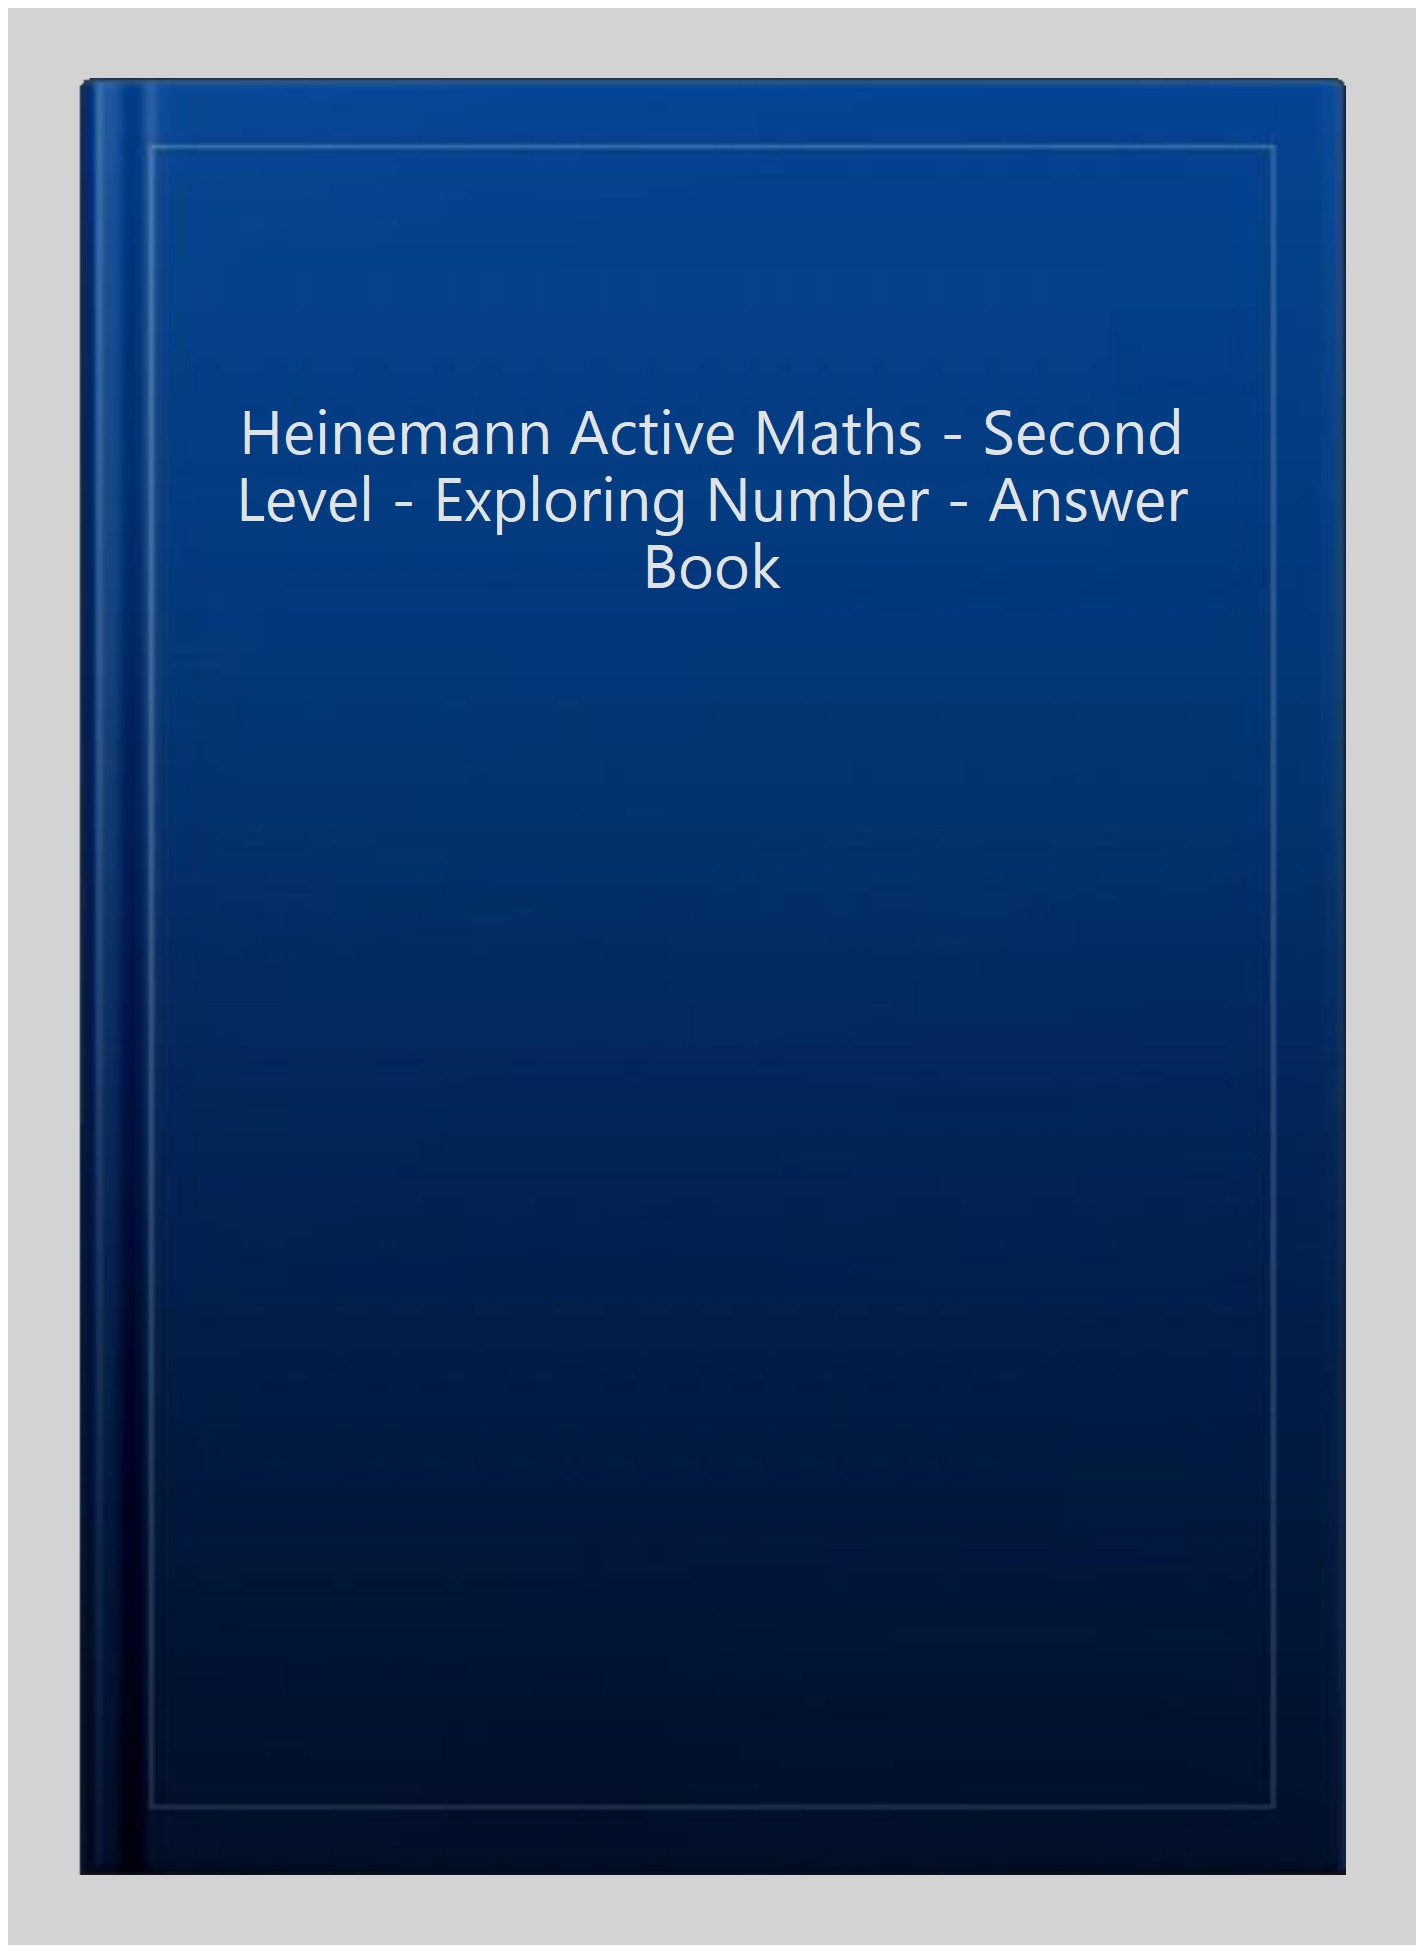 Heinemann Active Maths - Second Level - Exploring Number - Answer Book - Lynda Keith